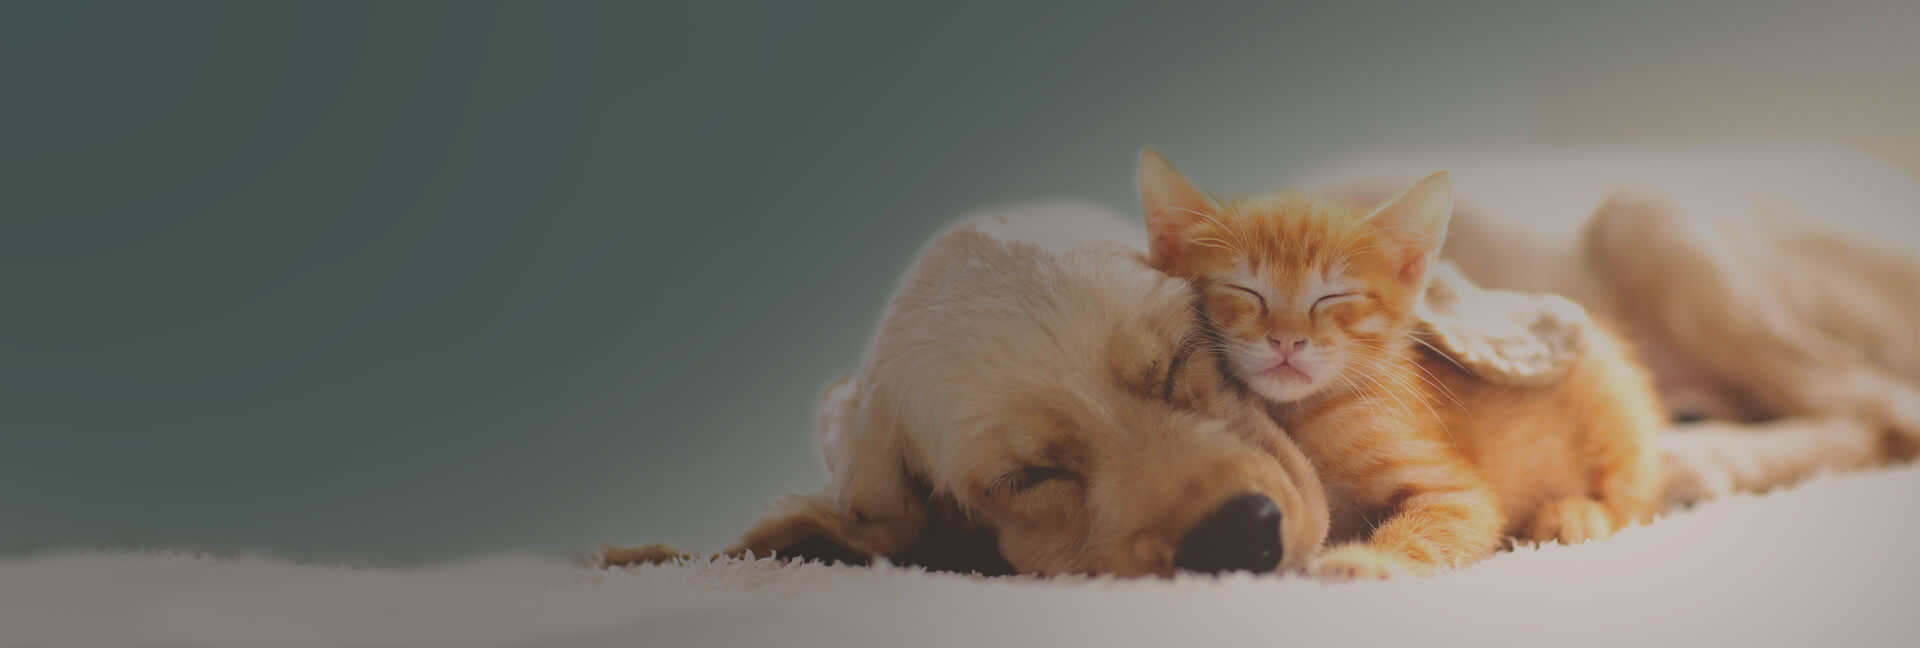 An image of an orange tabby kitten napping next to a golden lab puppy